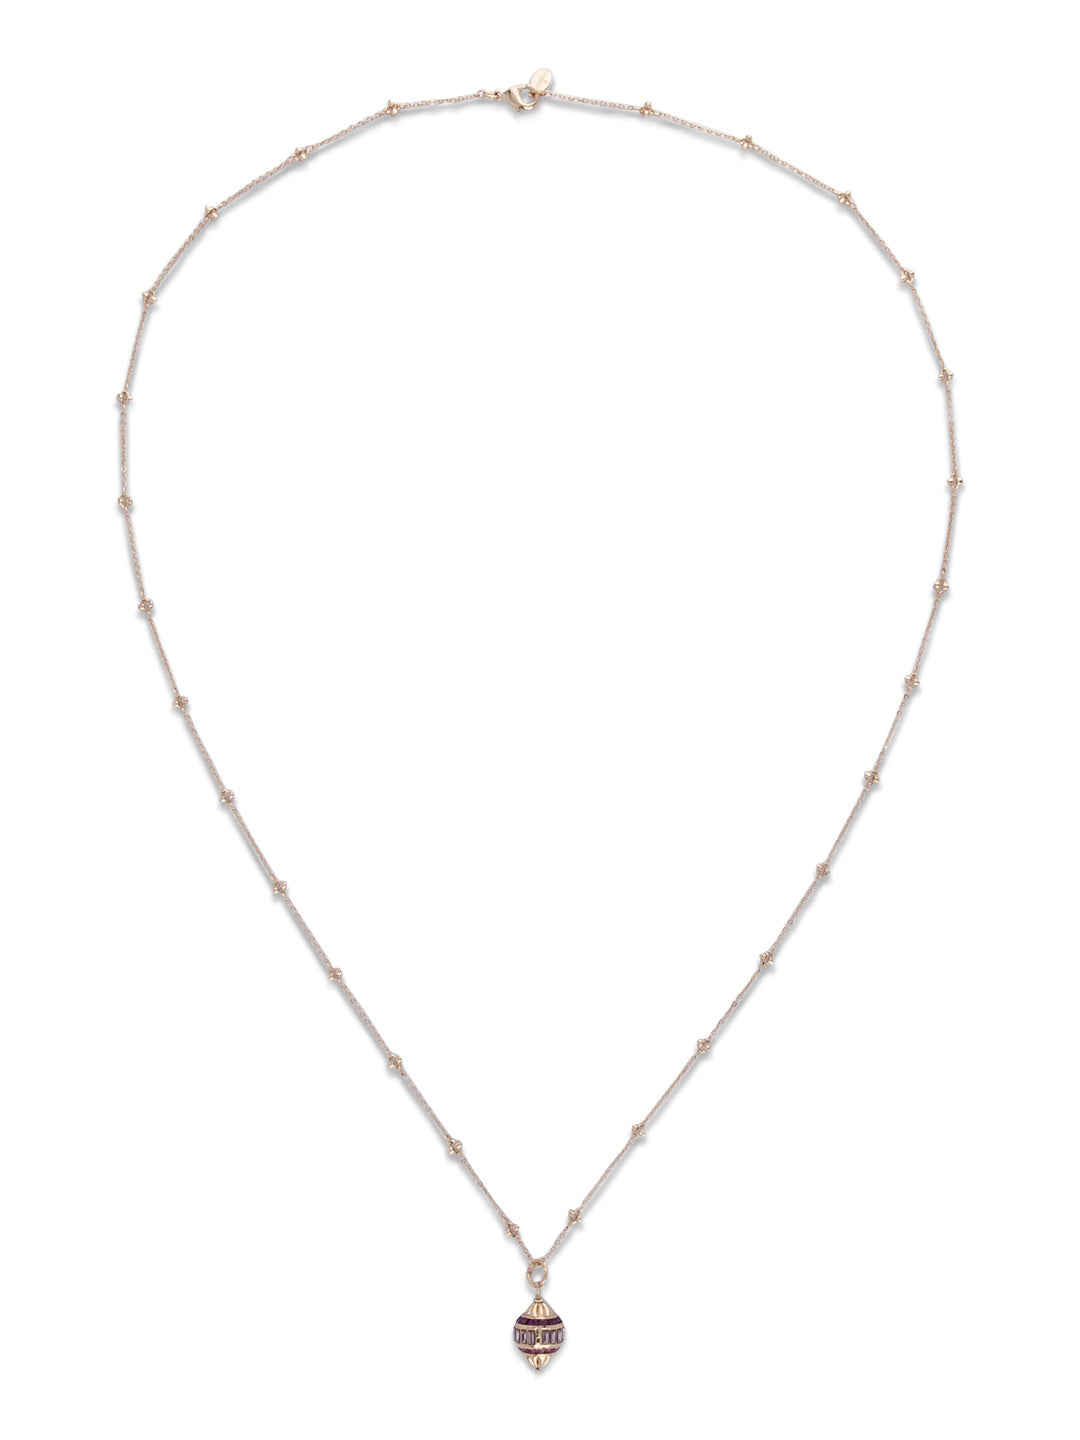 Lola Pendant Necklace - NEN14BGBGA - <p>The Lola Pendant Necklace dangles something completely unique and sparkly front and center, accented by smaller gems on a delicate chain. Make it the special standout piece in your jewelry collection. From Sorrelli's Begonia collection in our Bright Gold-tone finish.</p>